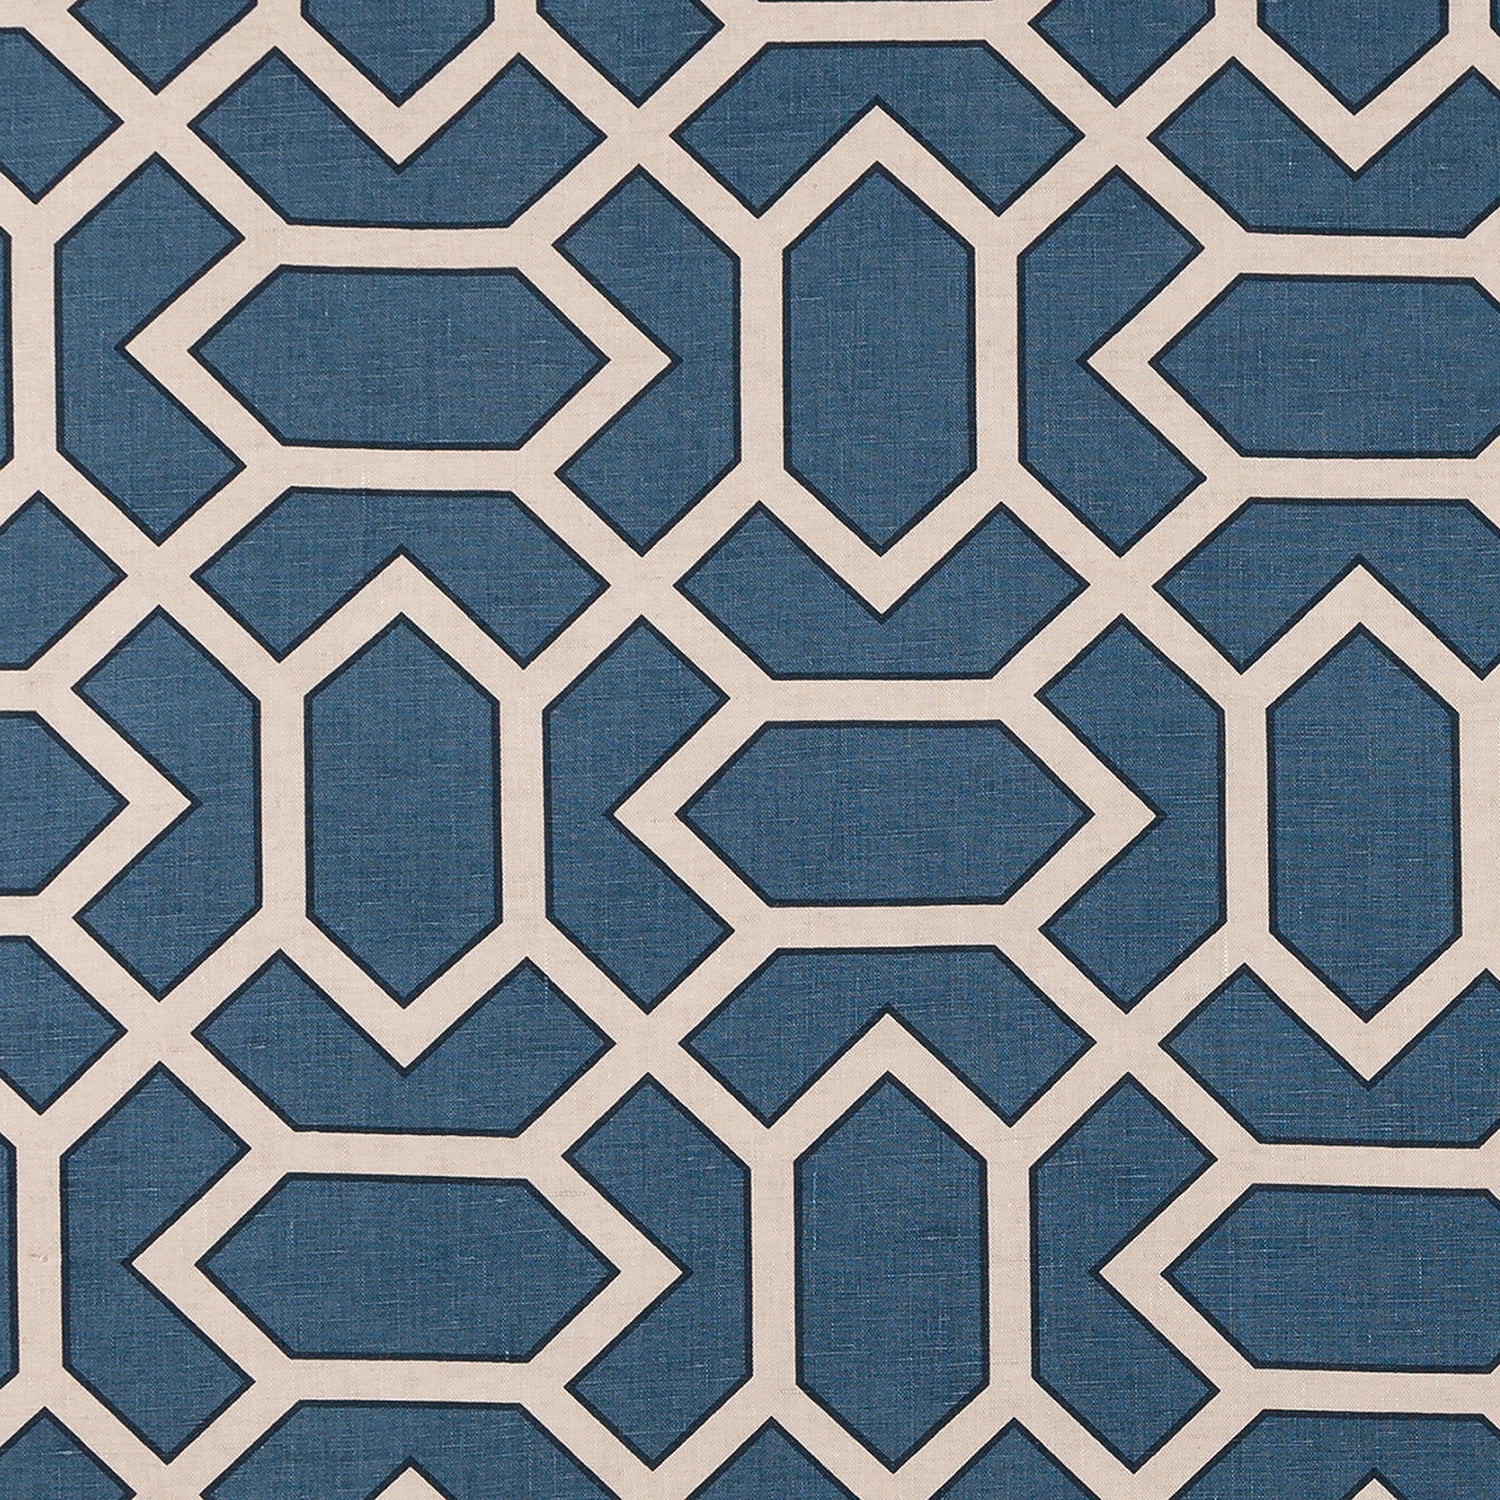 Fabric in a geometric lattice print in cream and black on a navy field.